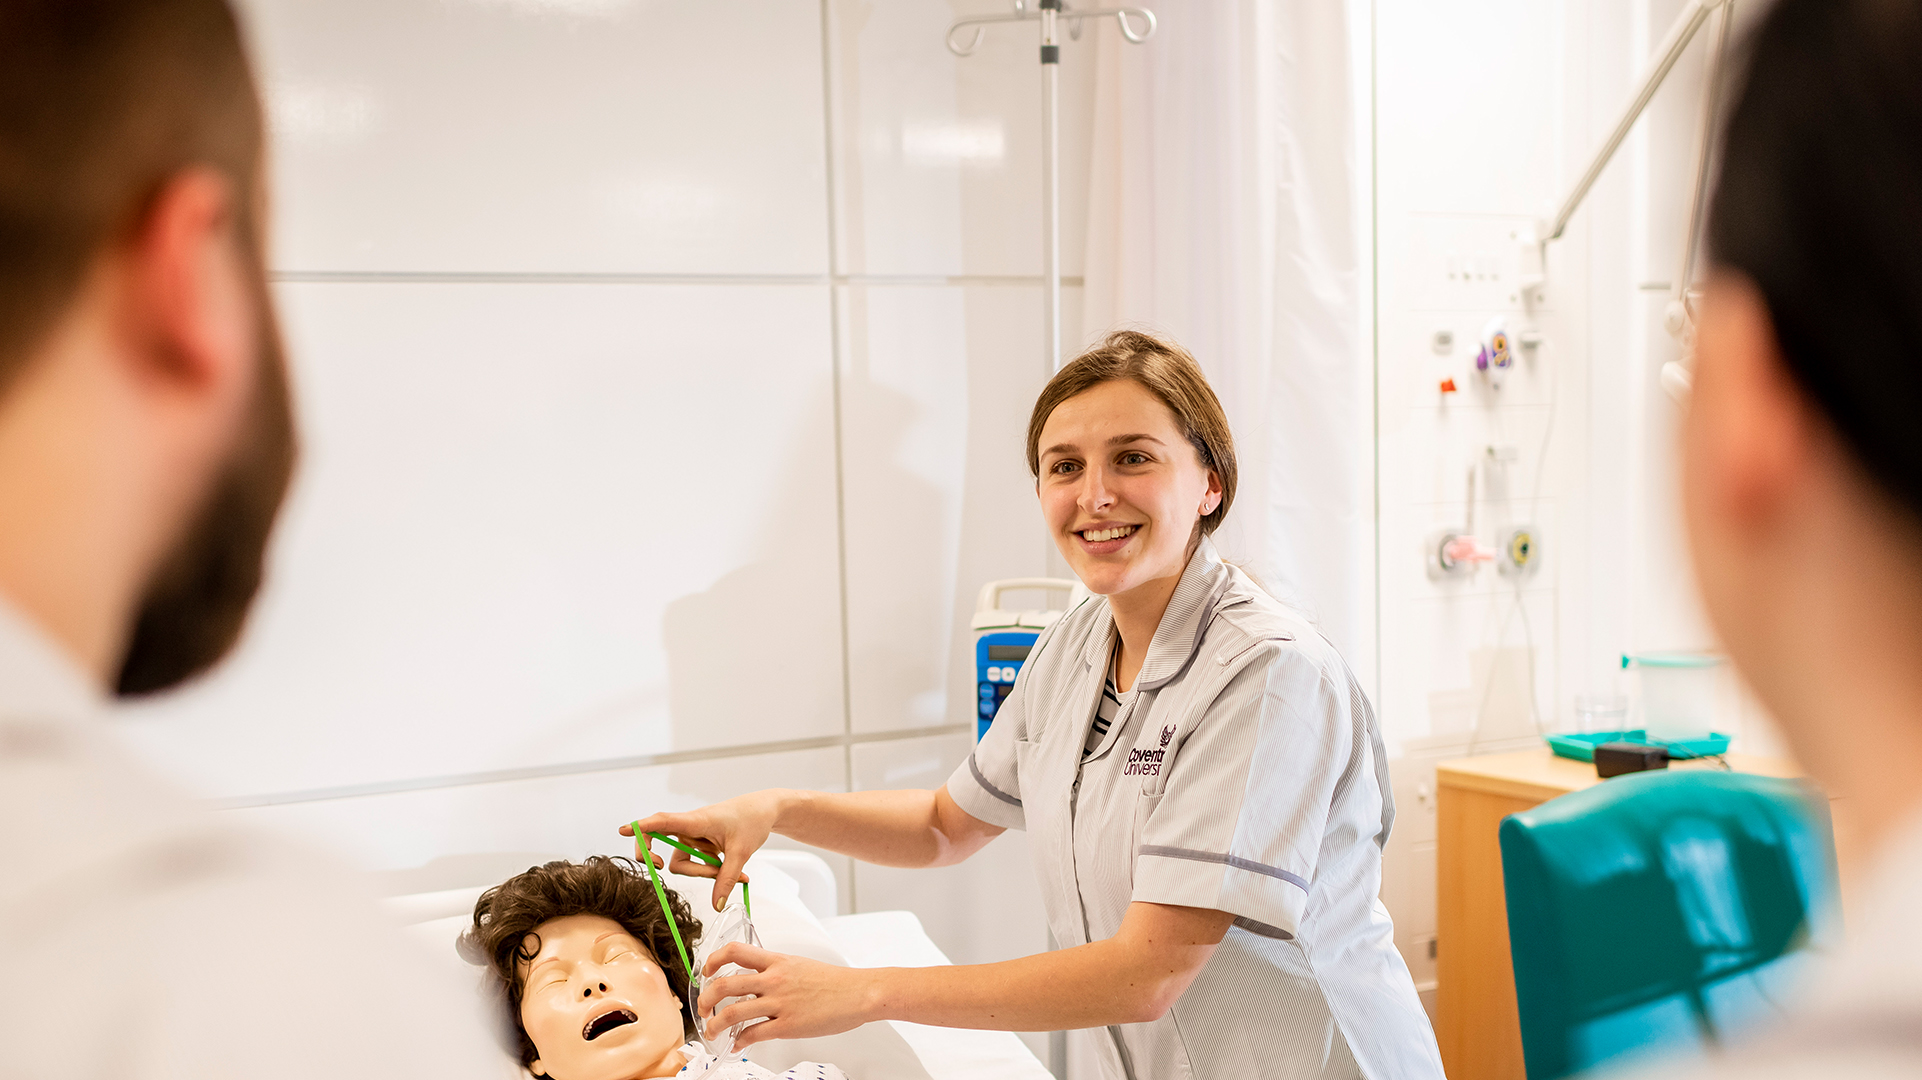 Health & Social Care students using a dummy